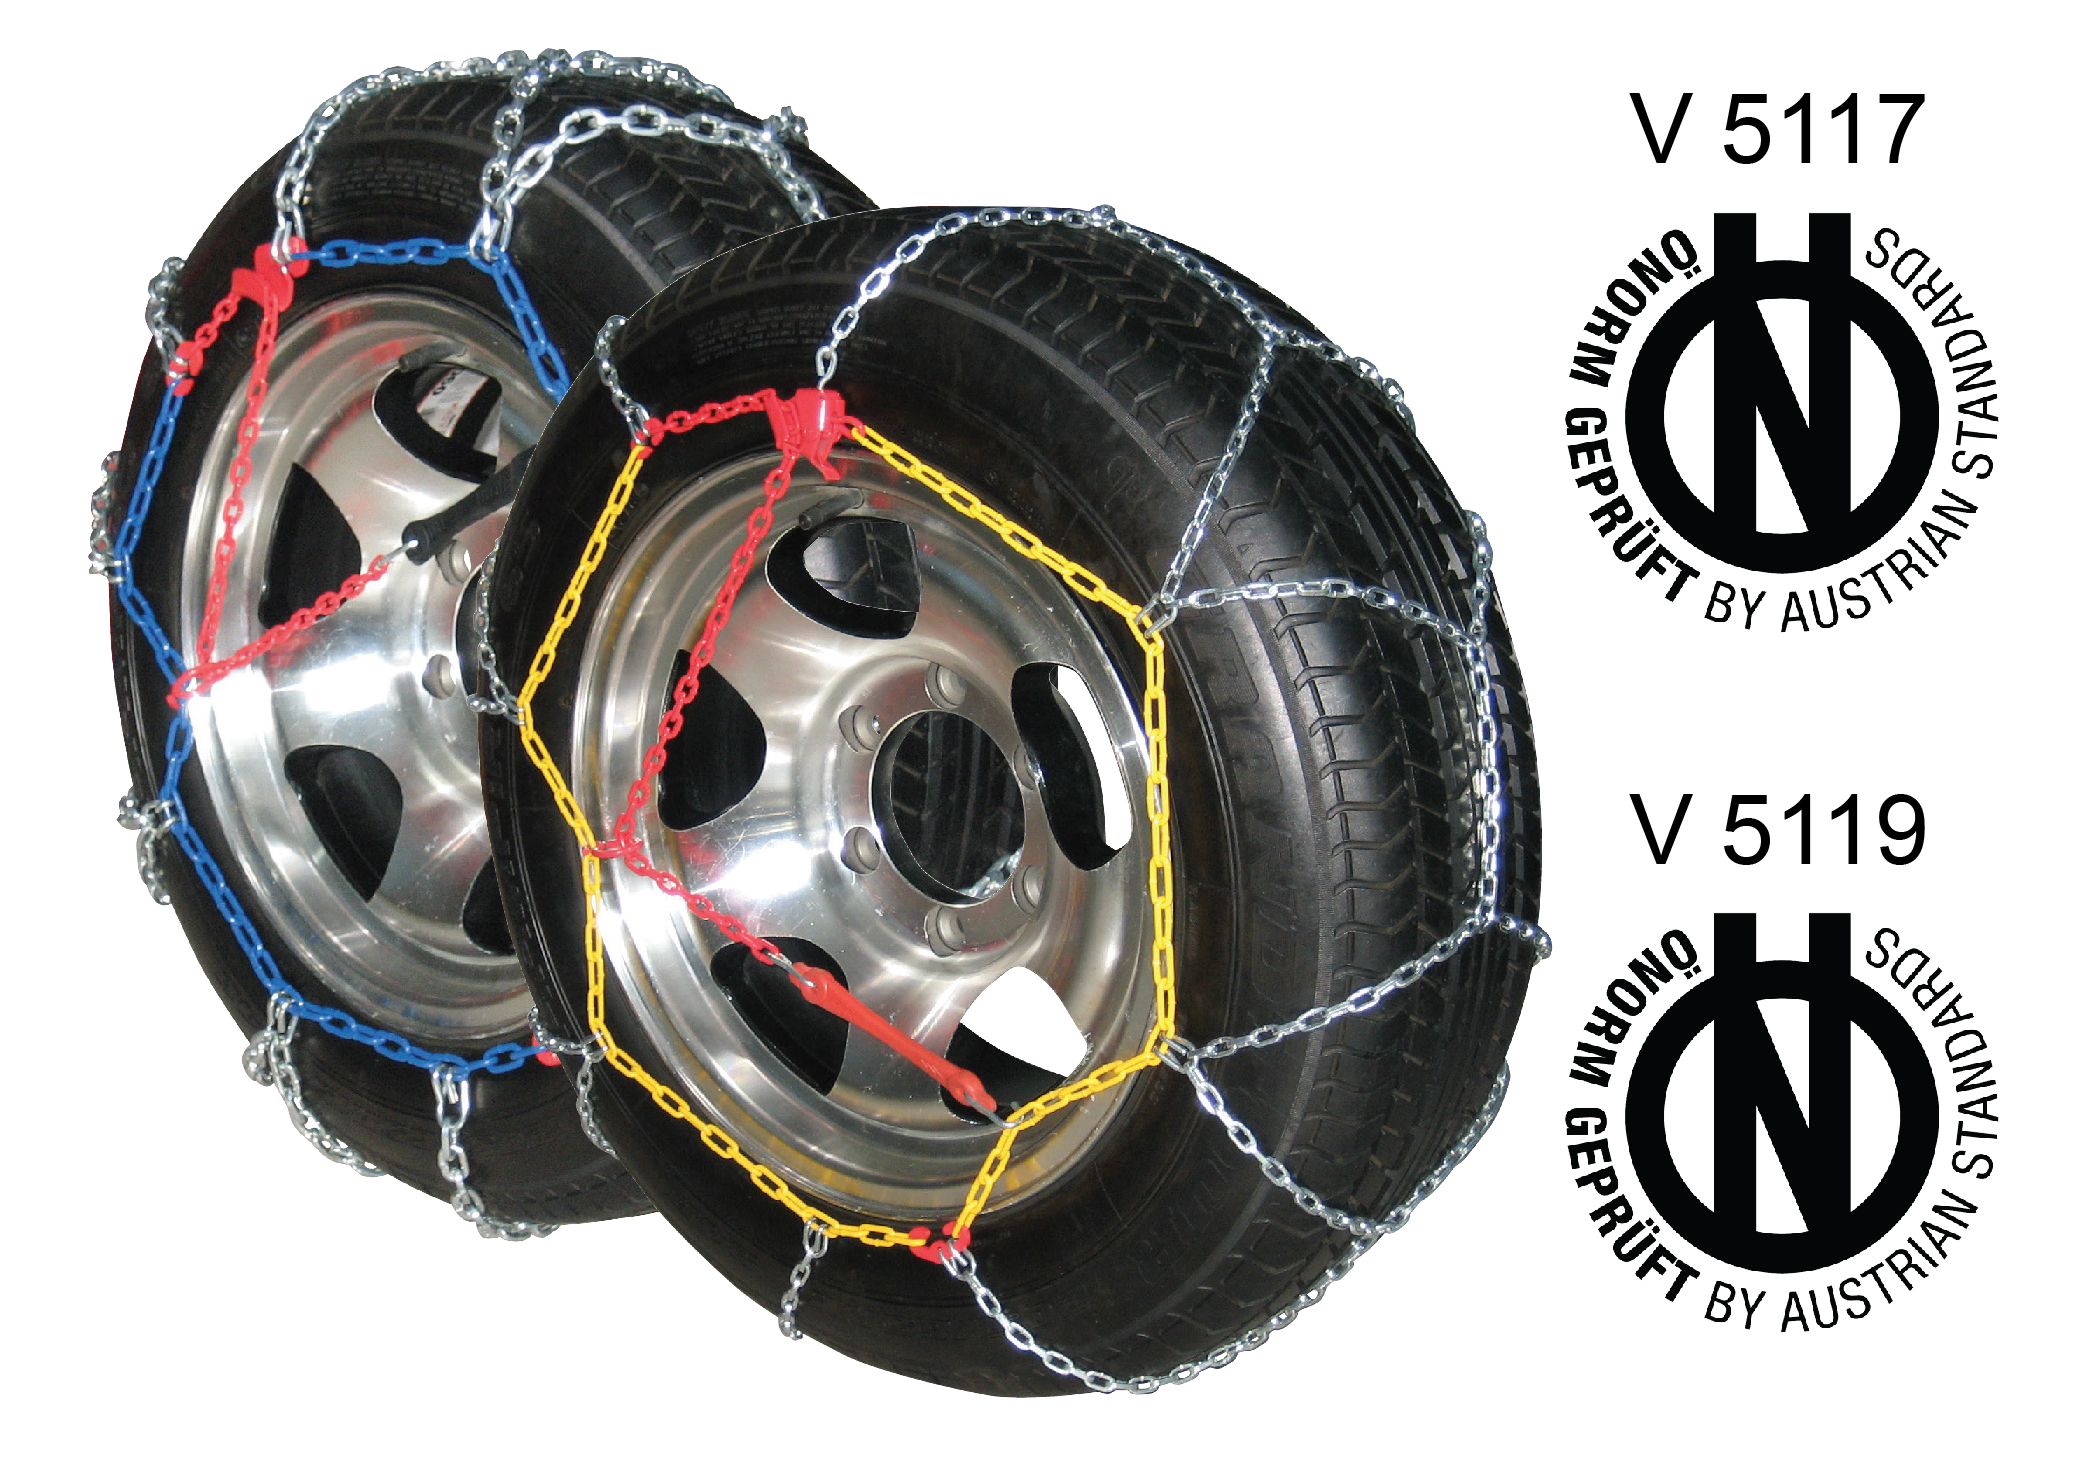 Snow chains 16mm